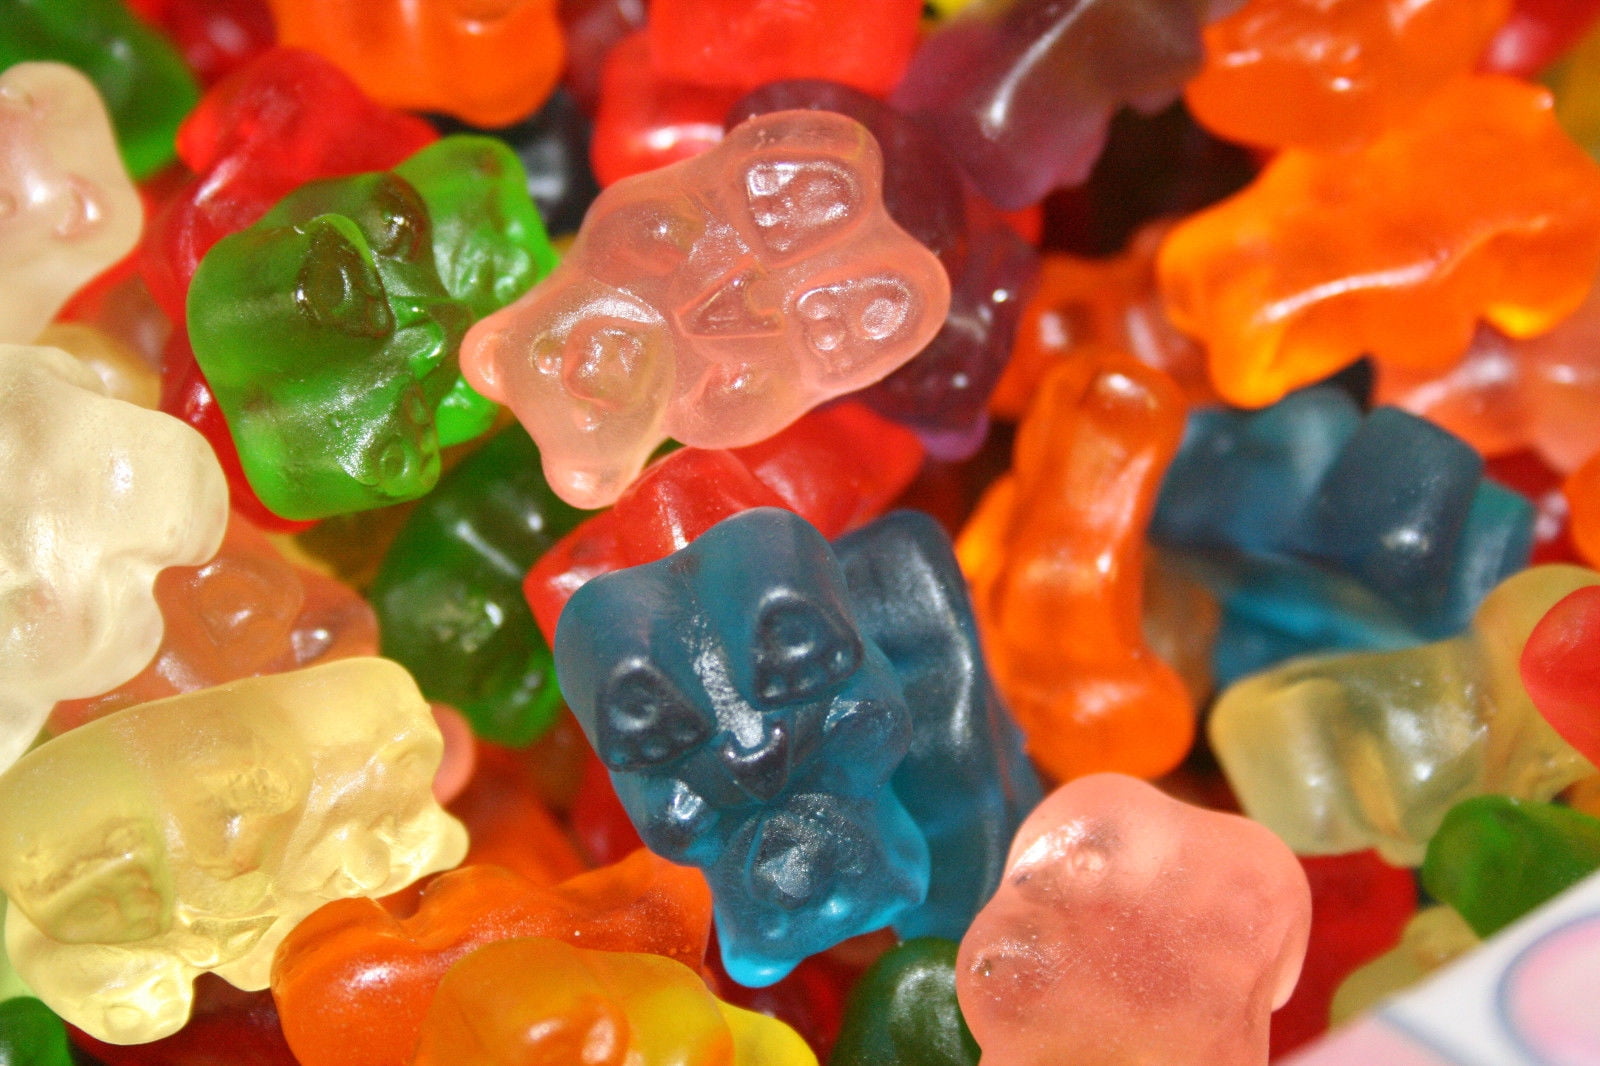 Buy BAYSIDE CANDY GUMMY BEARS ALBANESE ASSORTED 12 FLAVOR, 5LBS at Walmart....